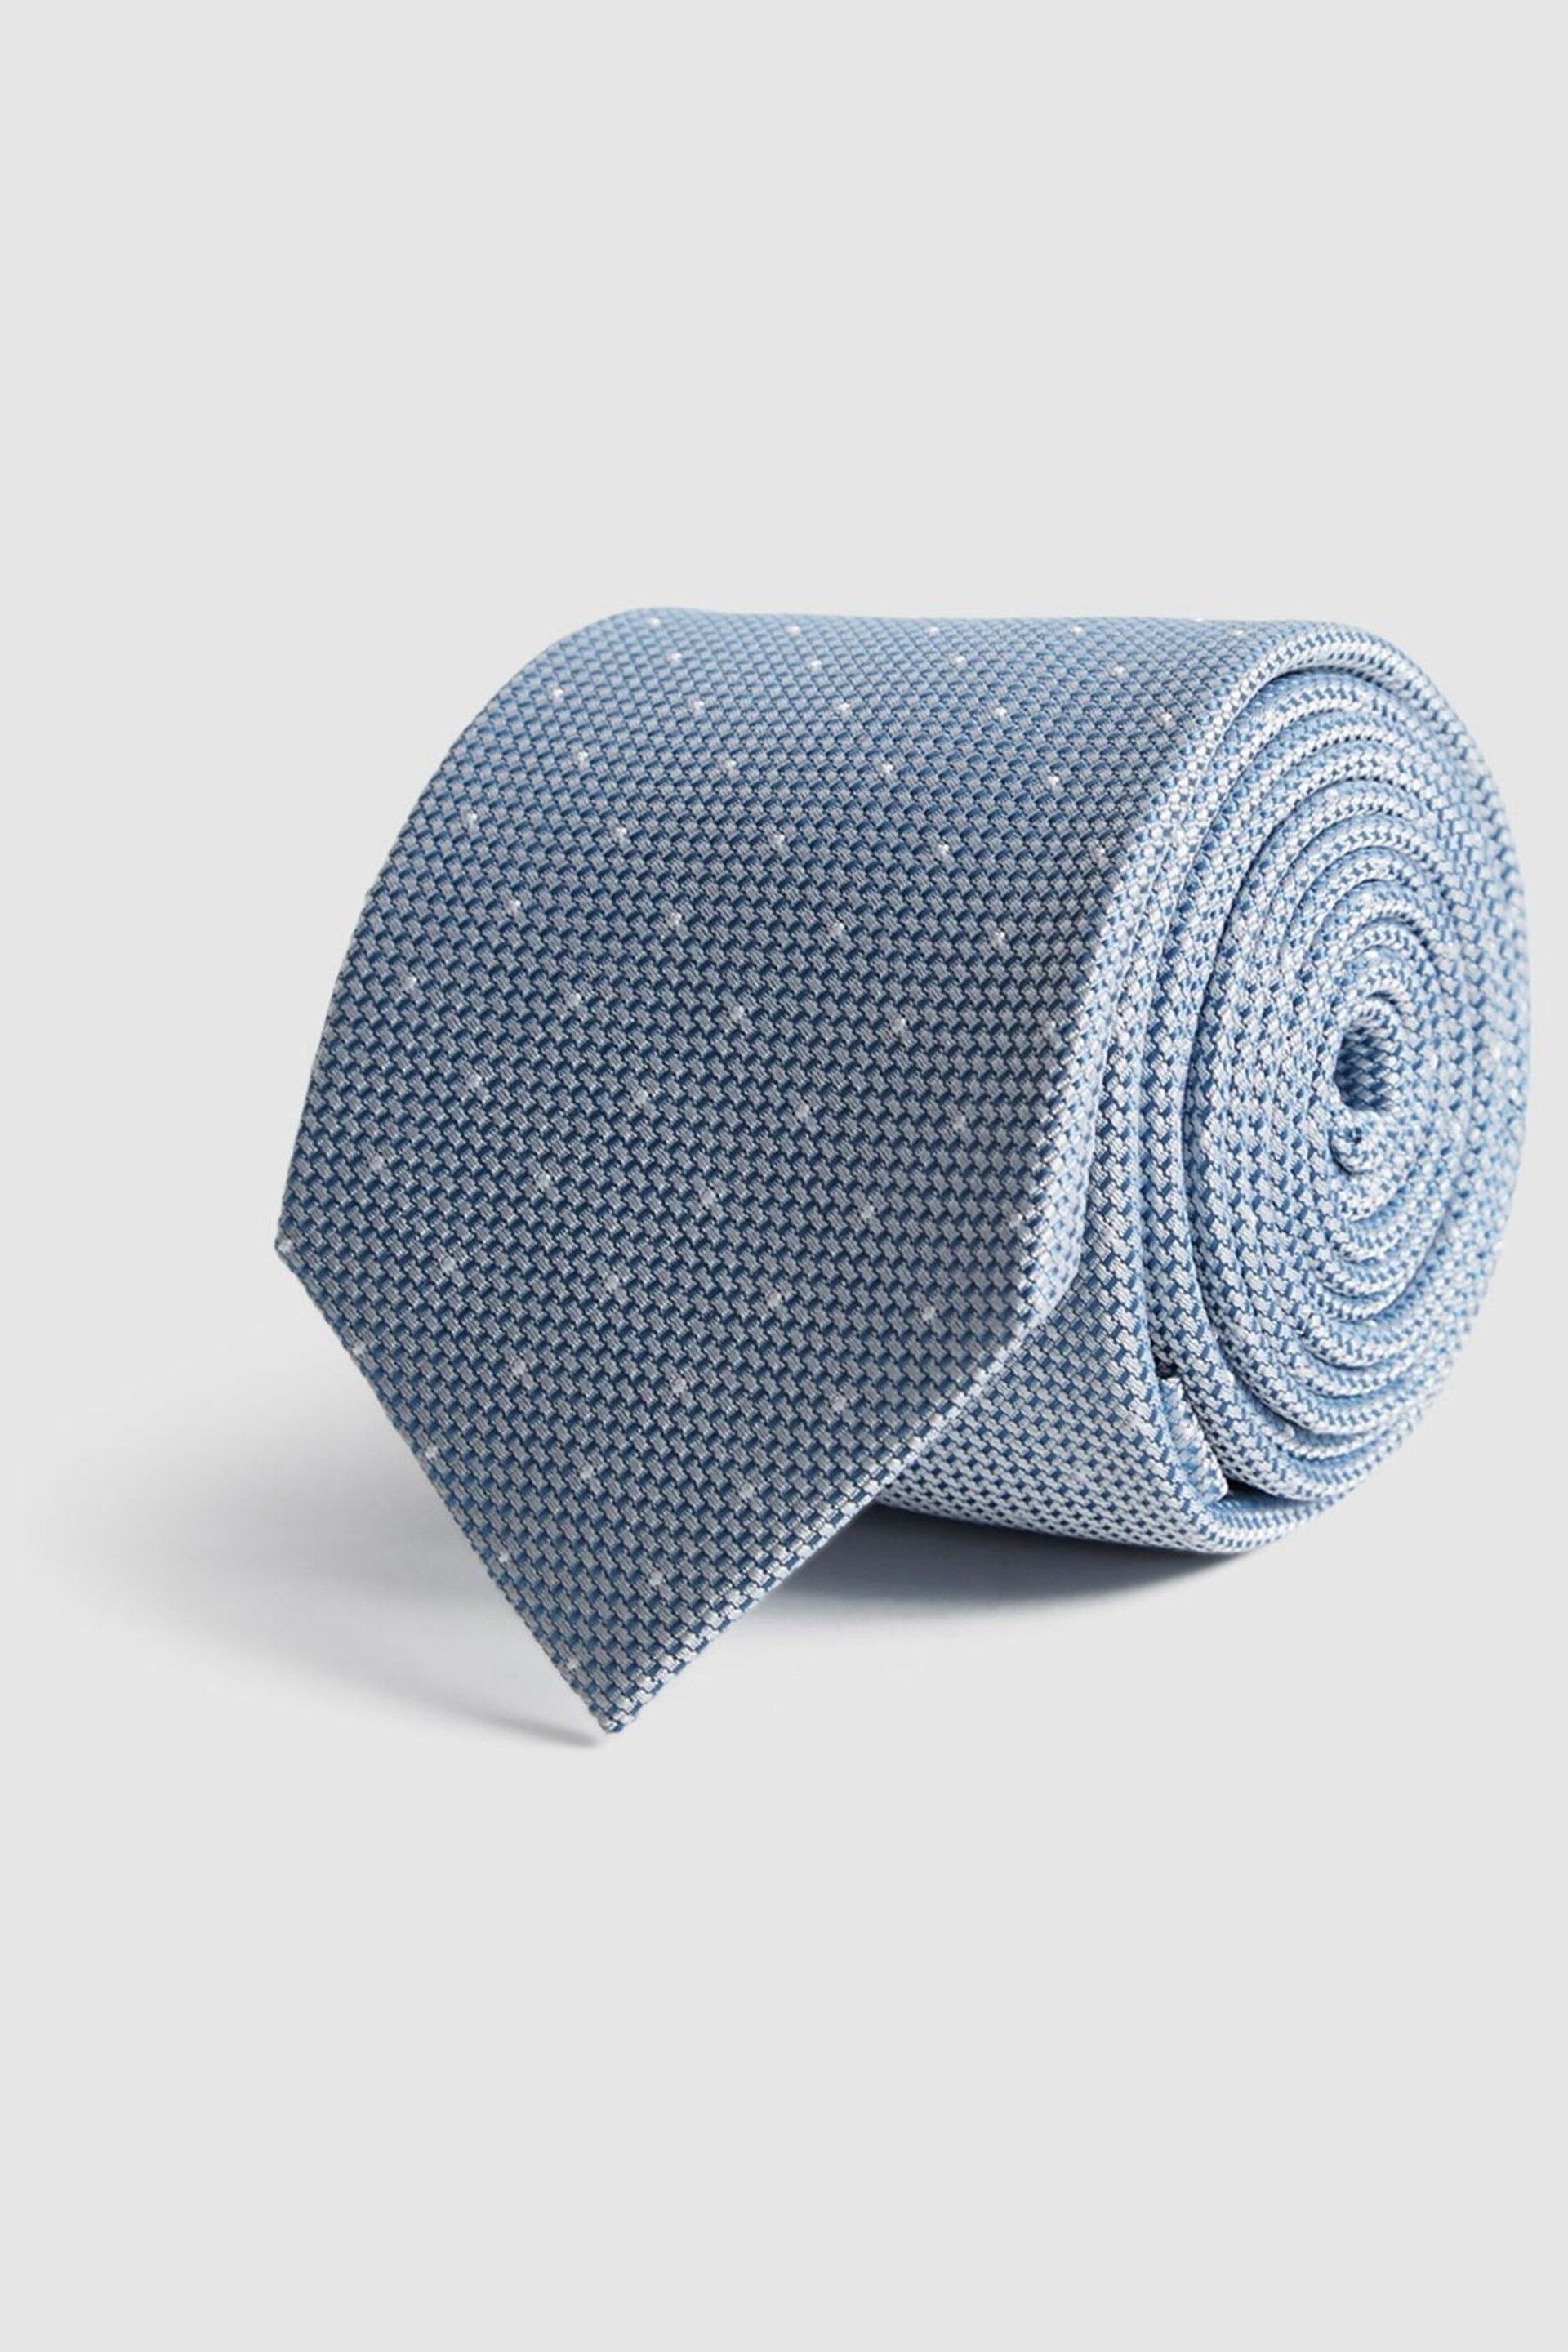 Reiss Airforce Blue Liam Polka Dot Tie - Image 1 of 4